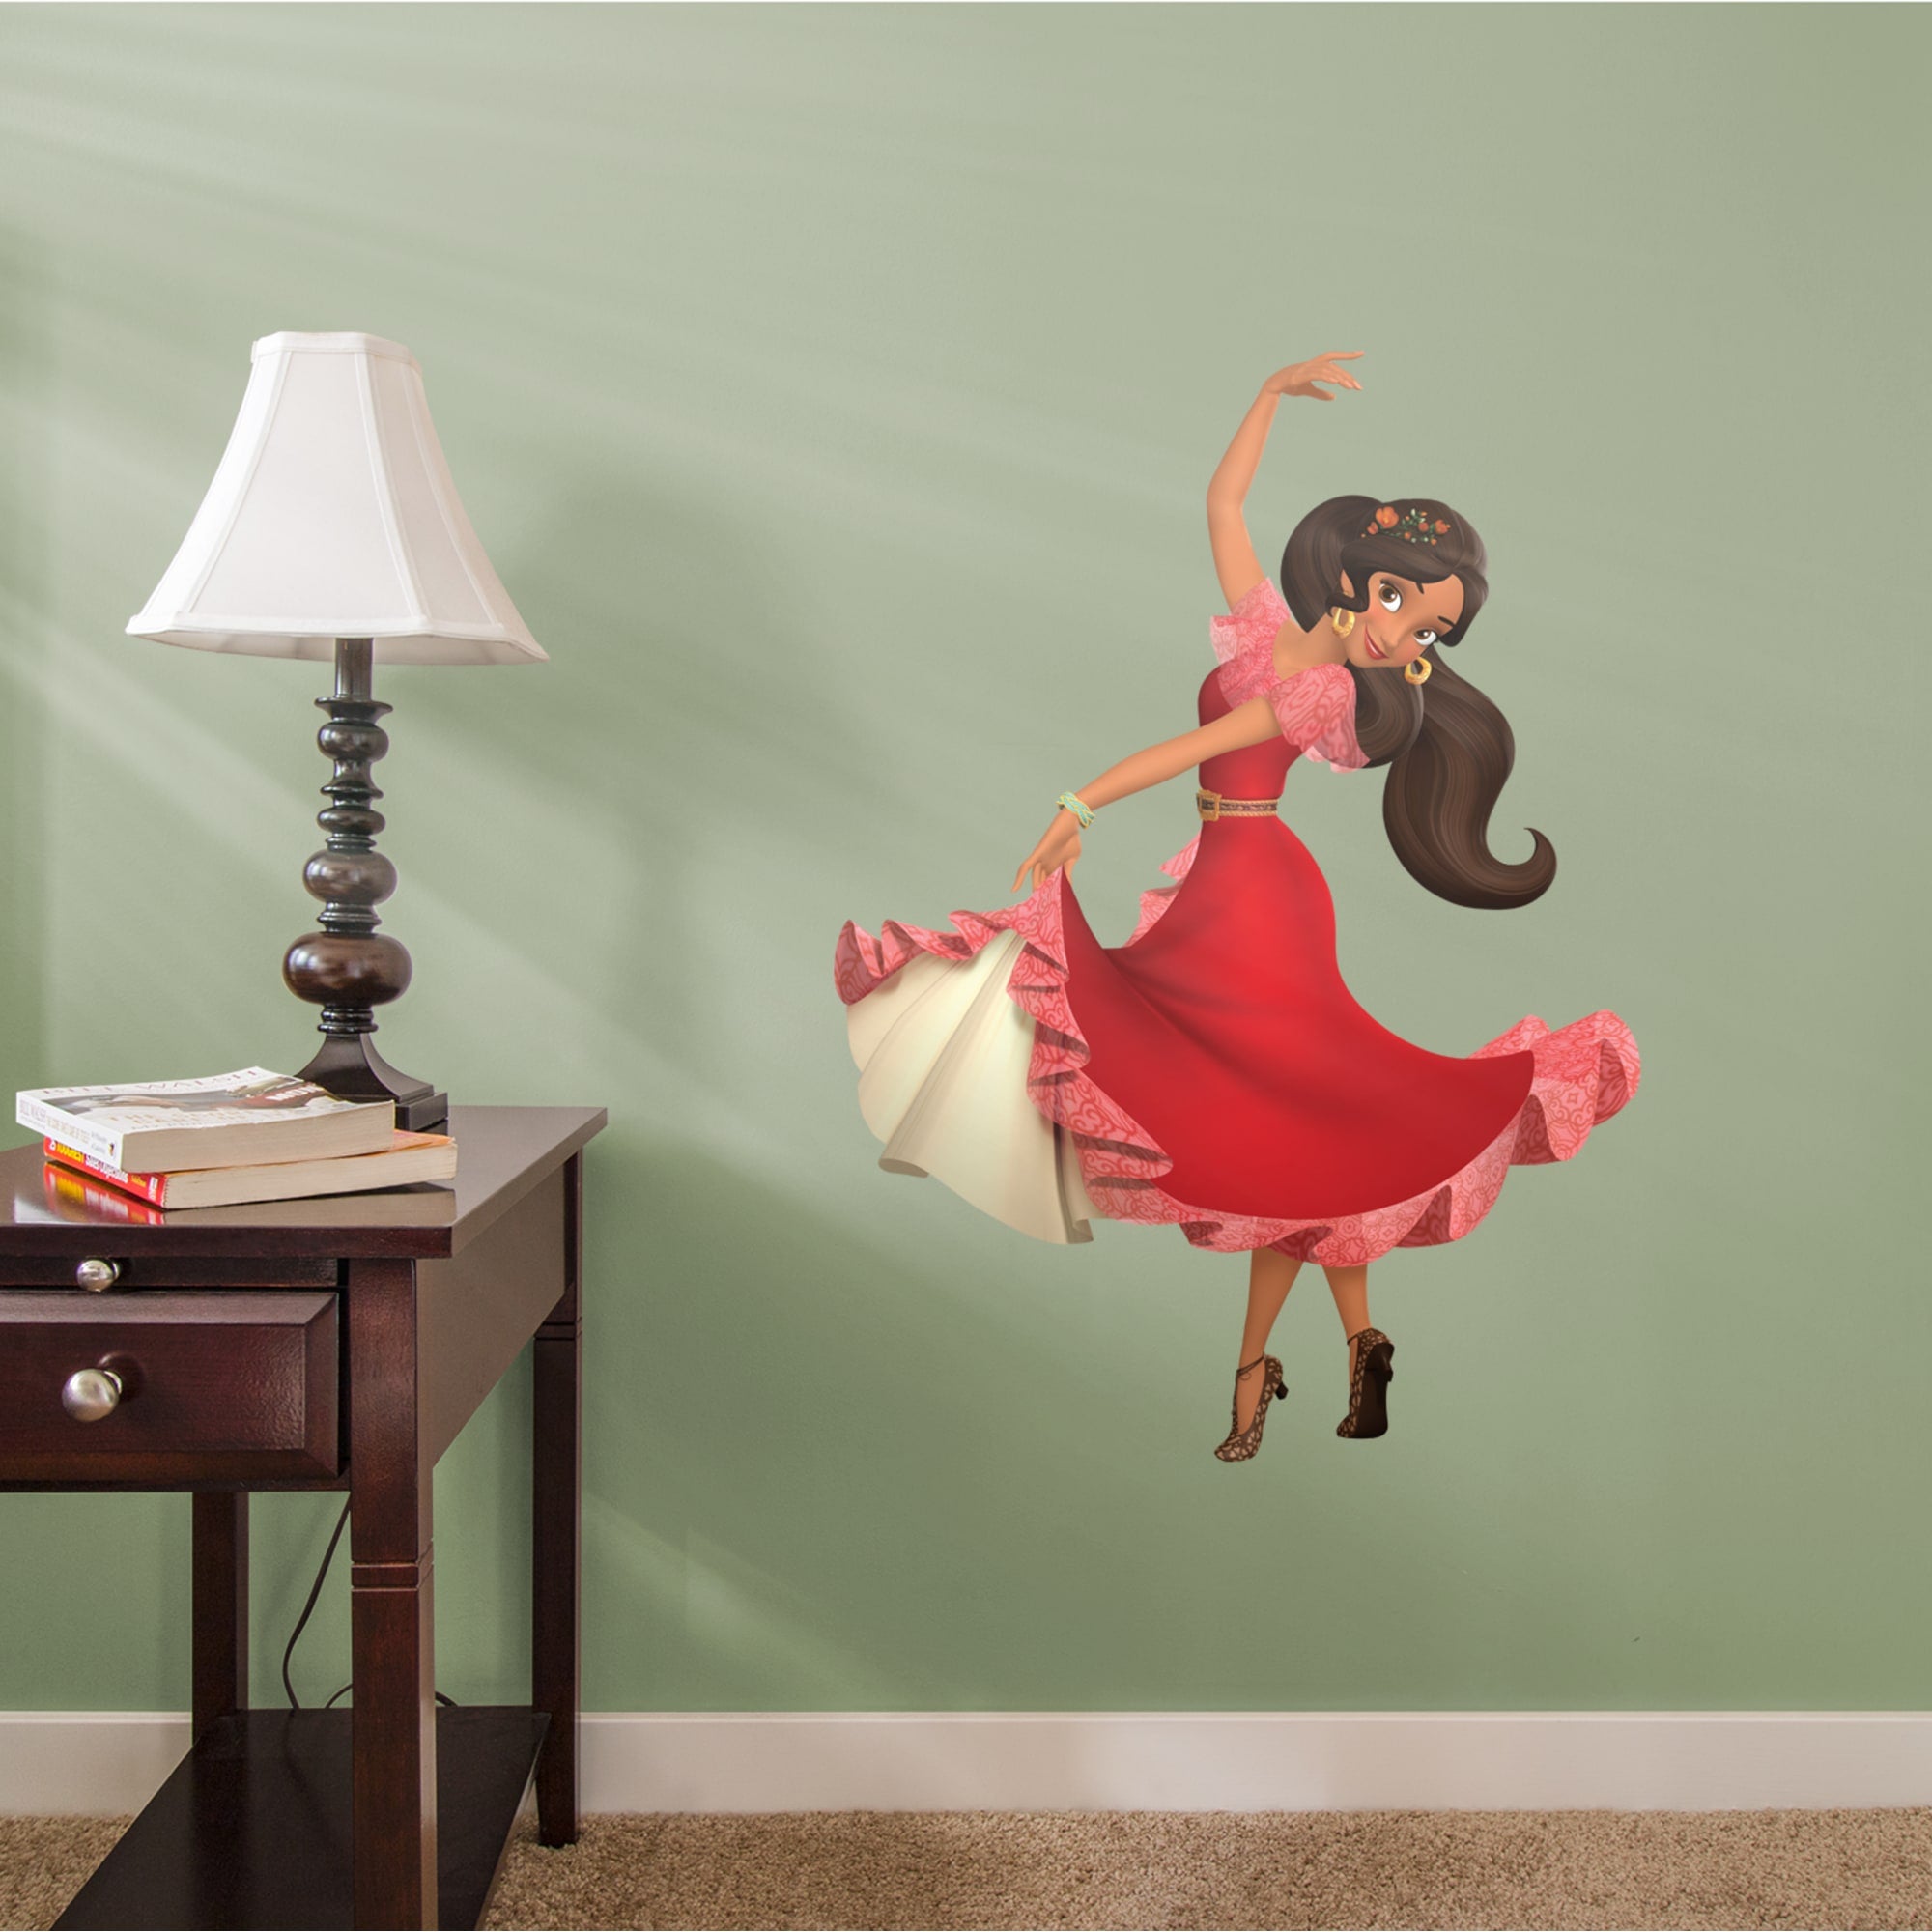 Elena of Avalor - Officially Licensed Disney Removable Wall Decal 26.0"W x 36.0"H by Fathead | Vinyl